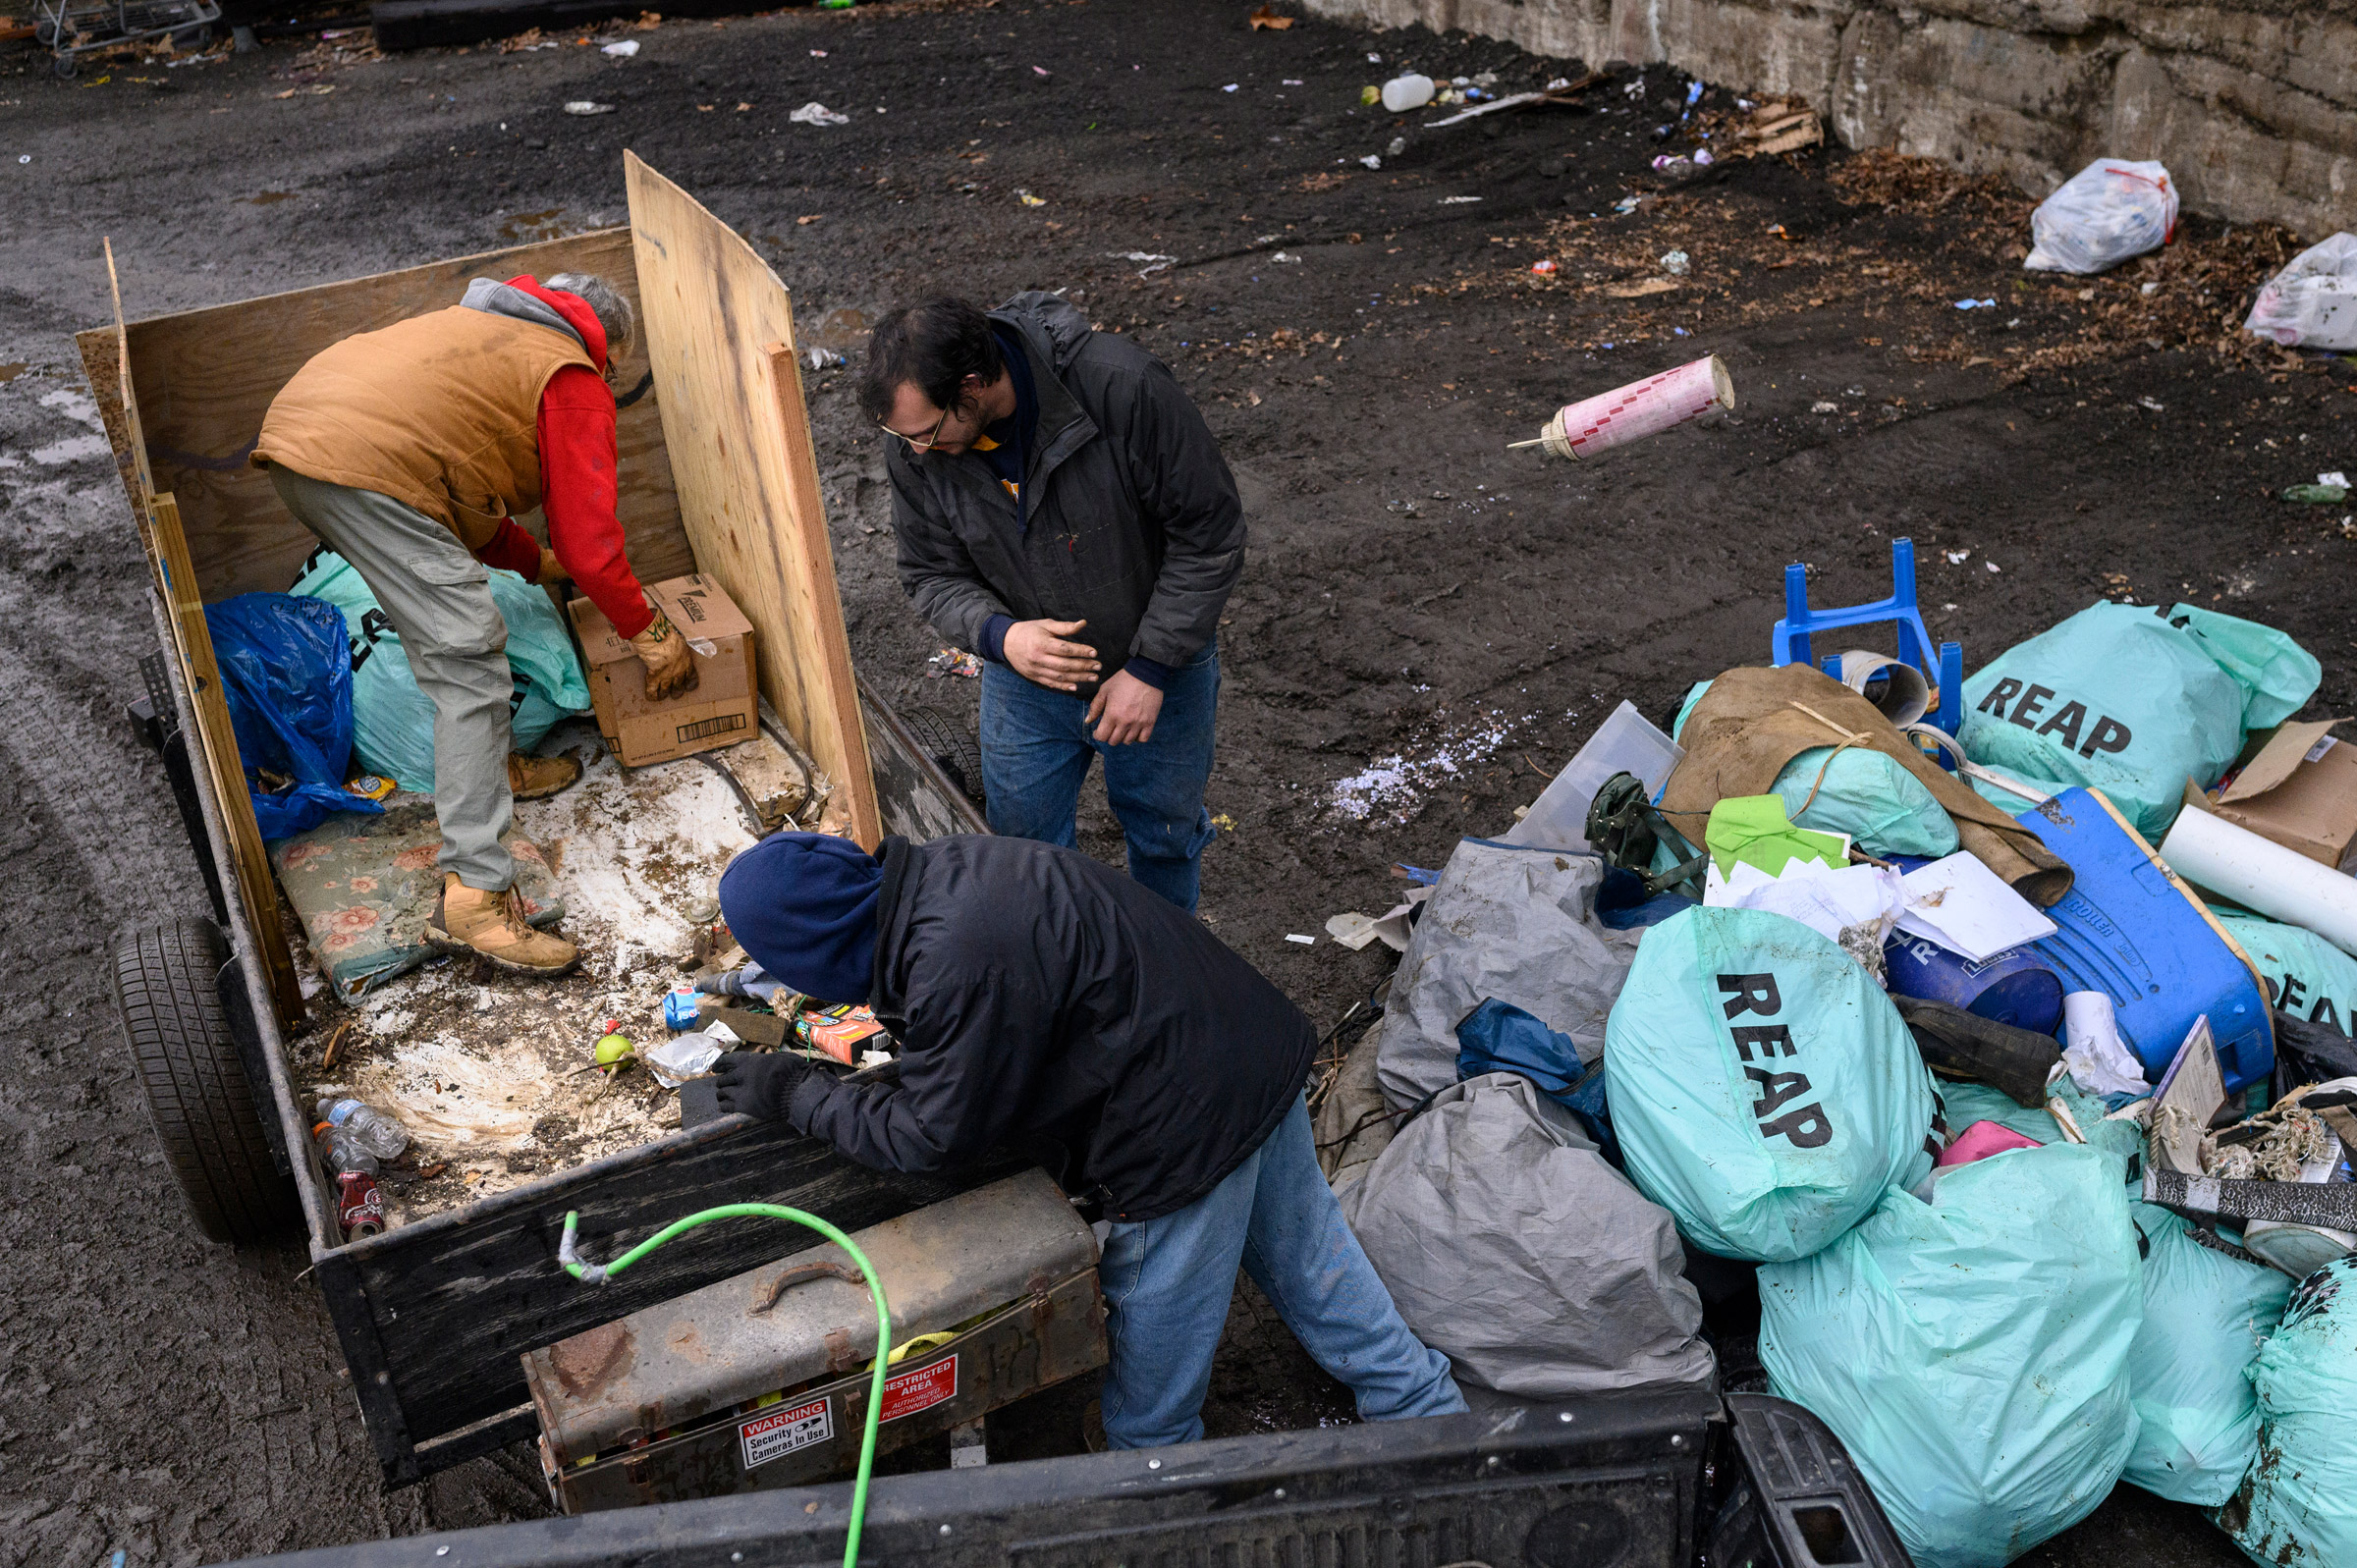 Paula Riethmiller and volunteers Gene and Michael dispose of trash found in encampments at the city dump in Wheeling on Dec. 21. Riethmiller helps lead Trash Talkers, an operation formed during the pandemic by the unhoused to solve trash accumulation in their tent encampments. Unhoused volunteers can earn gift cards and items such as phones through their volunteerism with the program. (Rebecca Kiger)